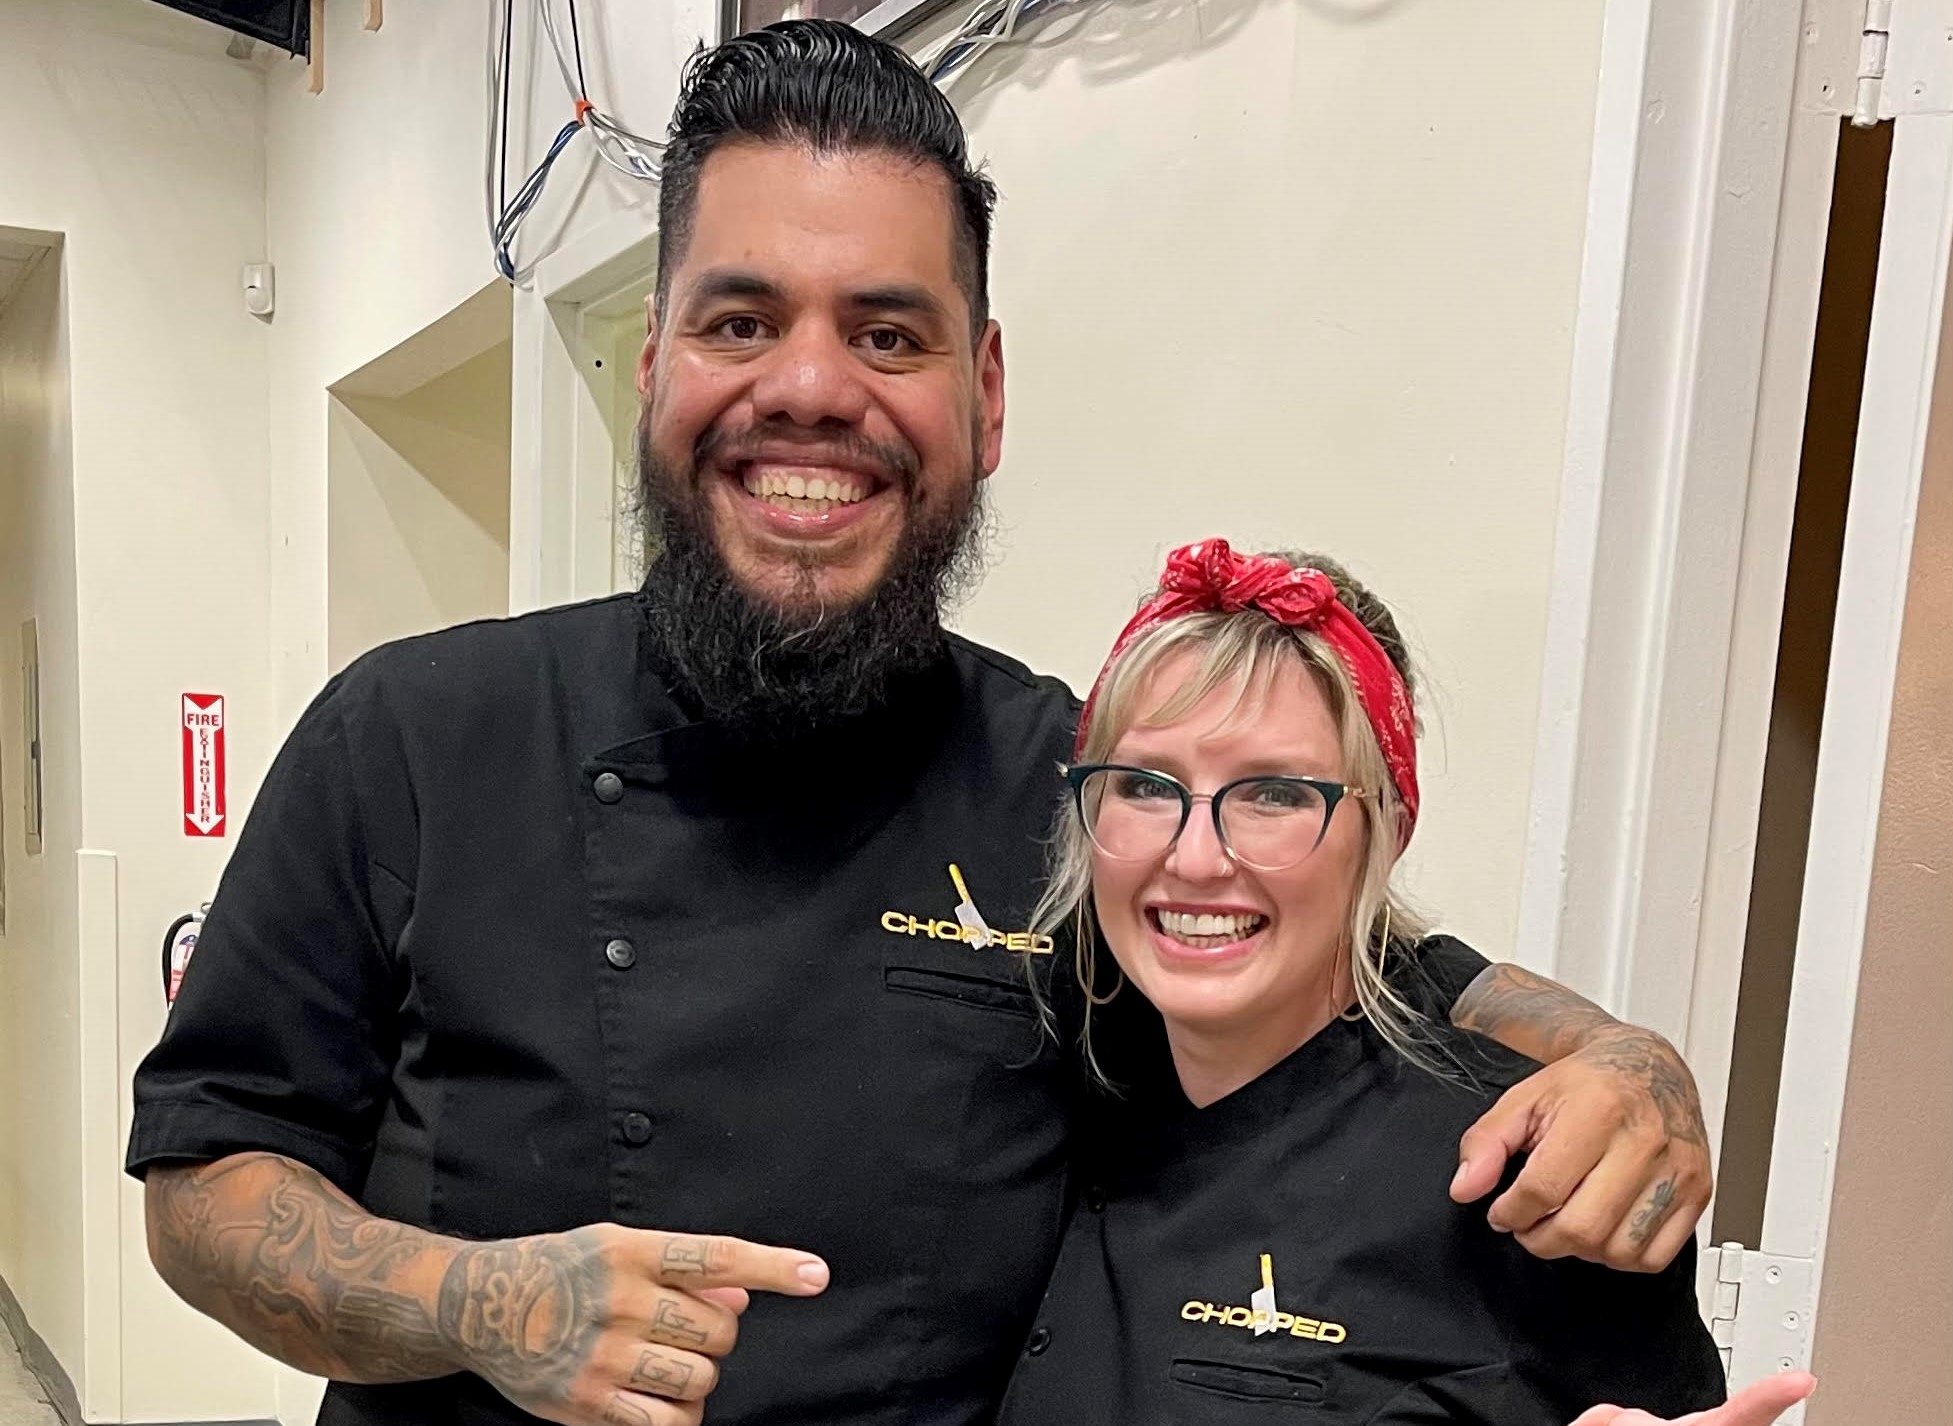 Chef Ashley and a fellow "Chopped" contestant. Photo courtesy of Hacienda Taproom & Kitchen.